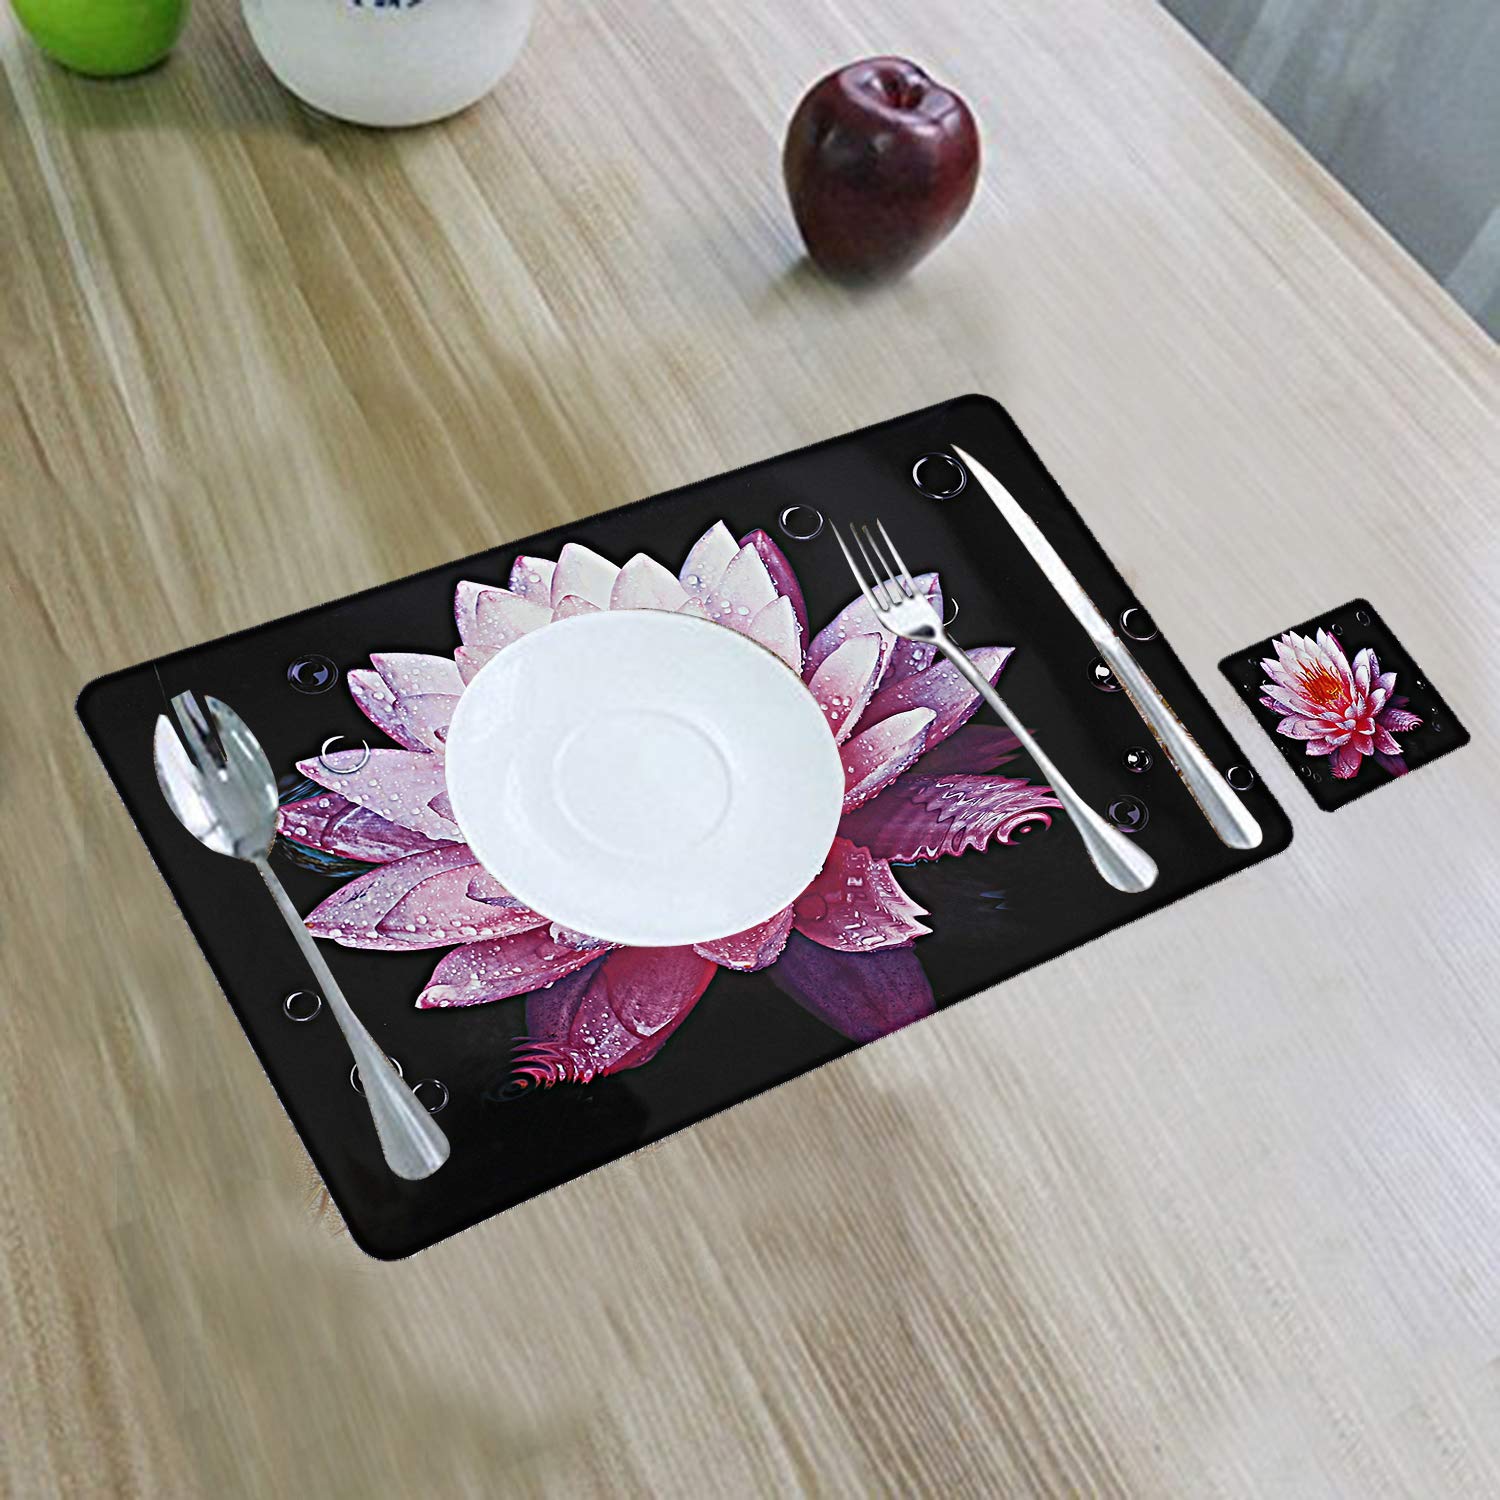 Kuber Industries Lotus Design PVC Dining Table Placemat Set with Tea Coasters (Multicolour) - 6 Pieces